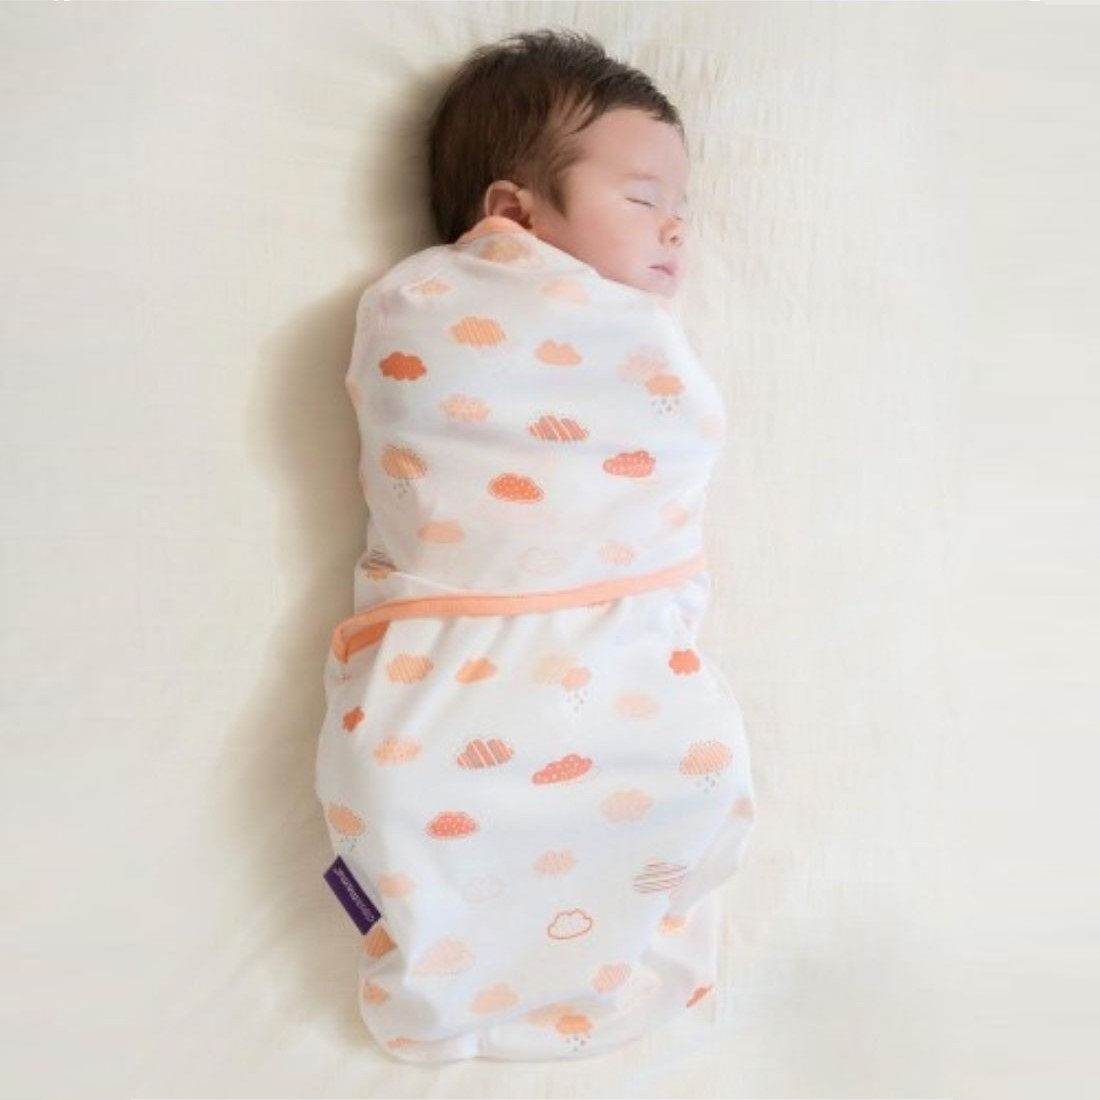 Clevamama Swaddle to Sleep Baby Swaddle (Assorted Colors)